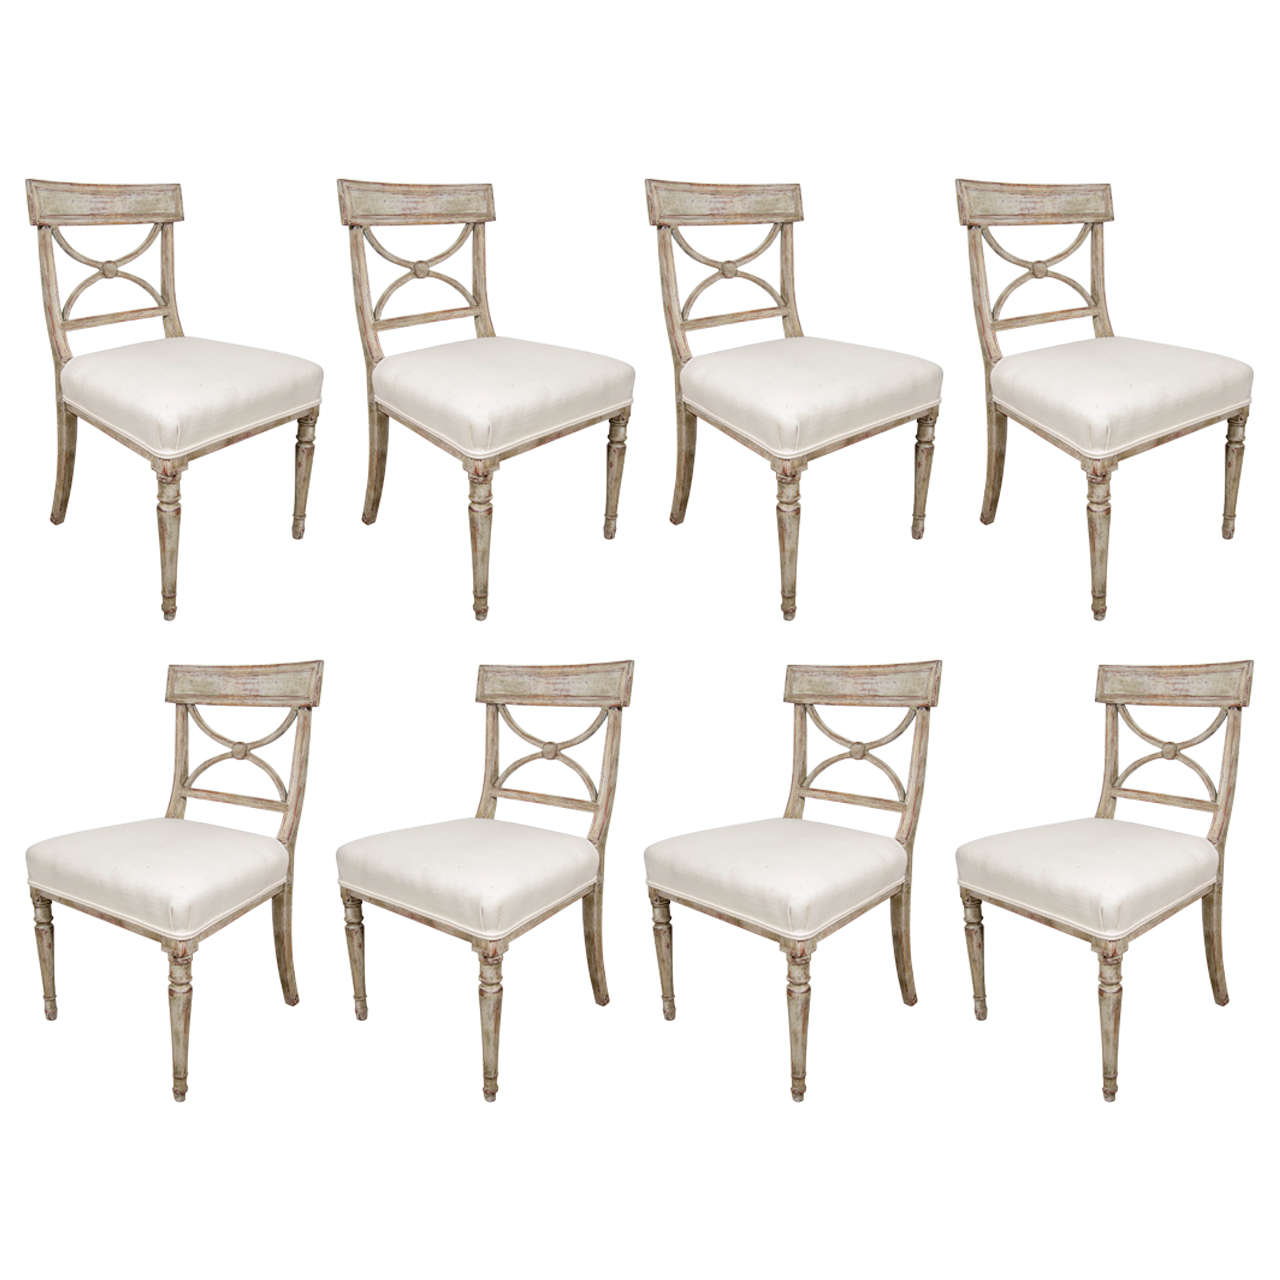 Set of Eight Swedish Dining Chairs